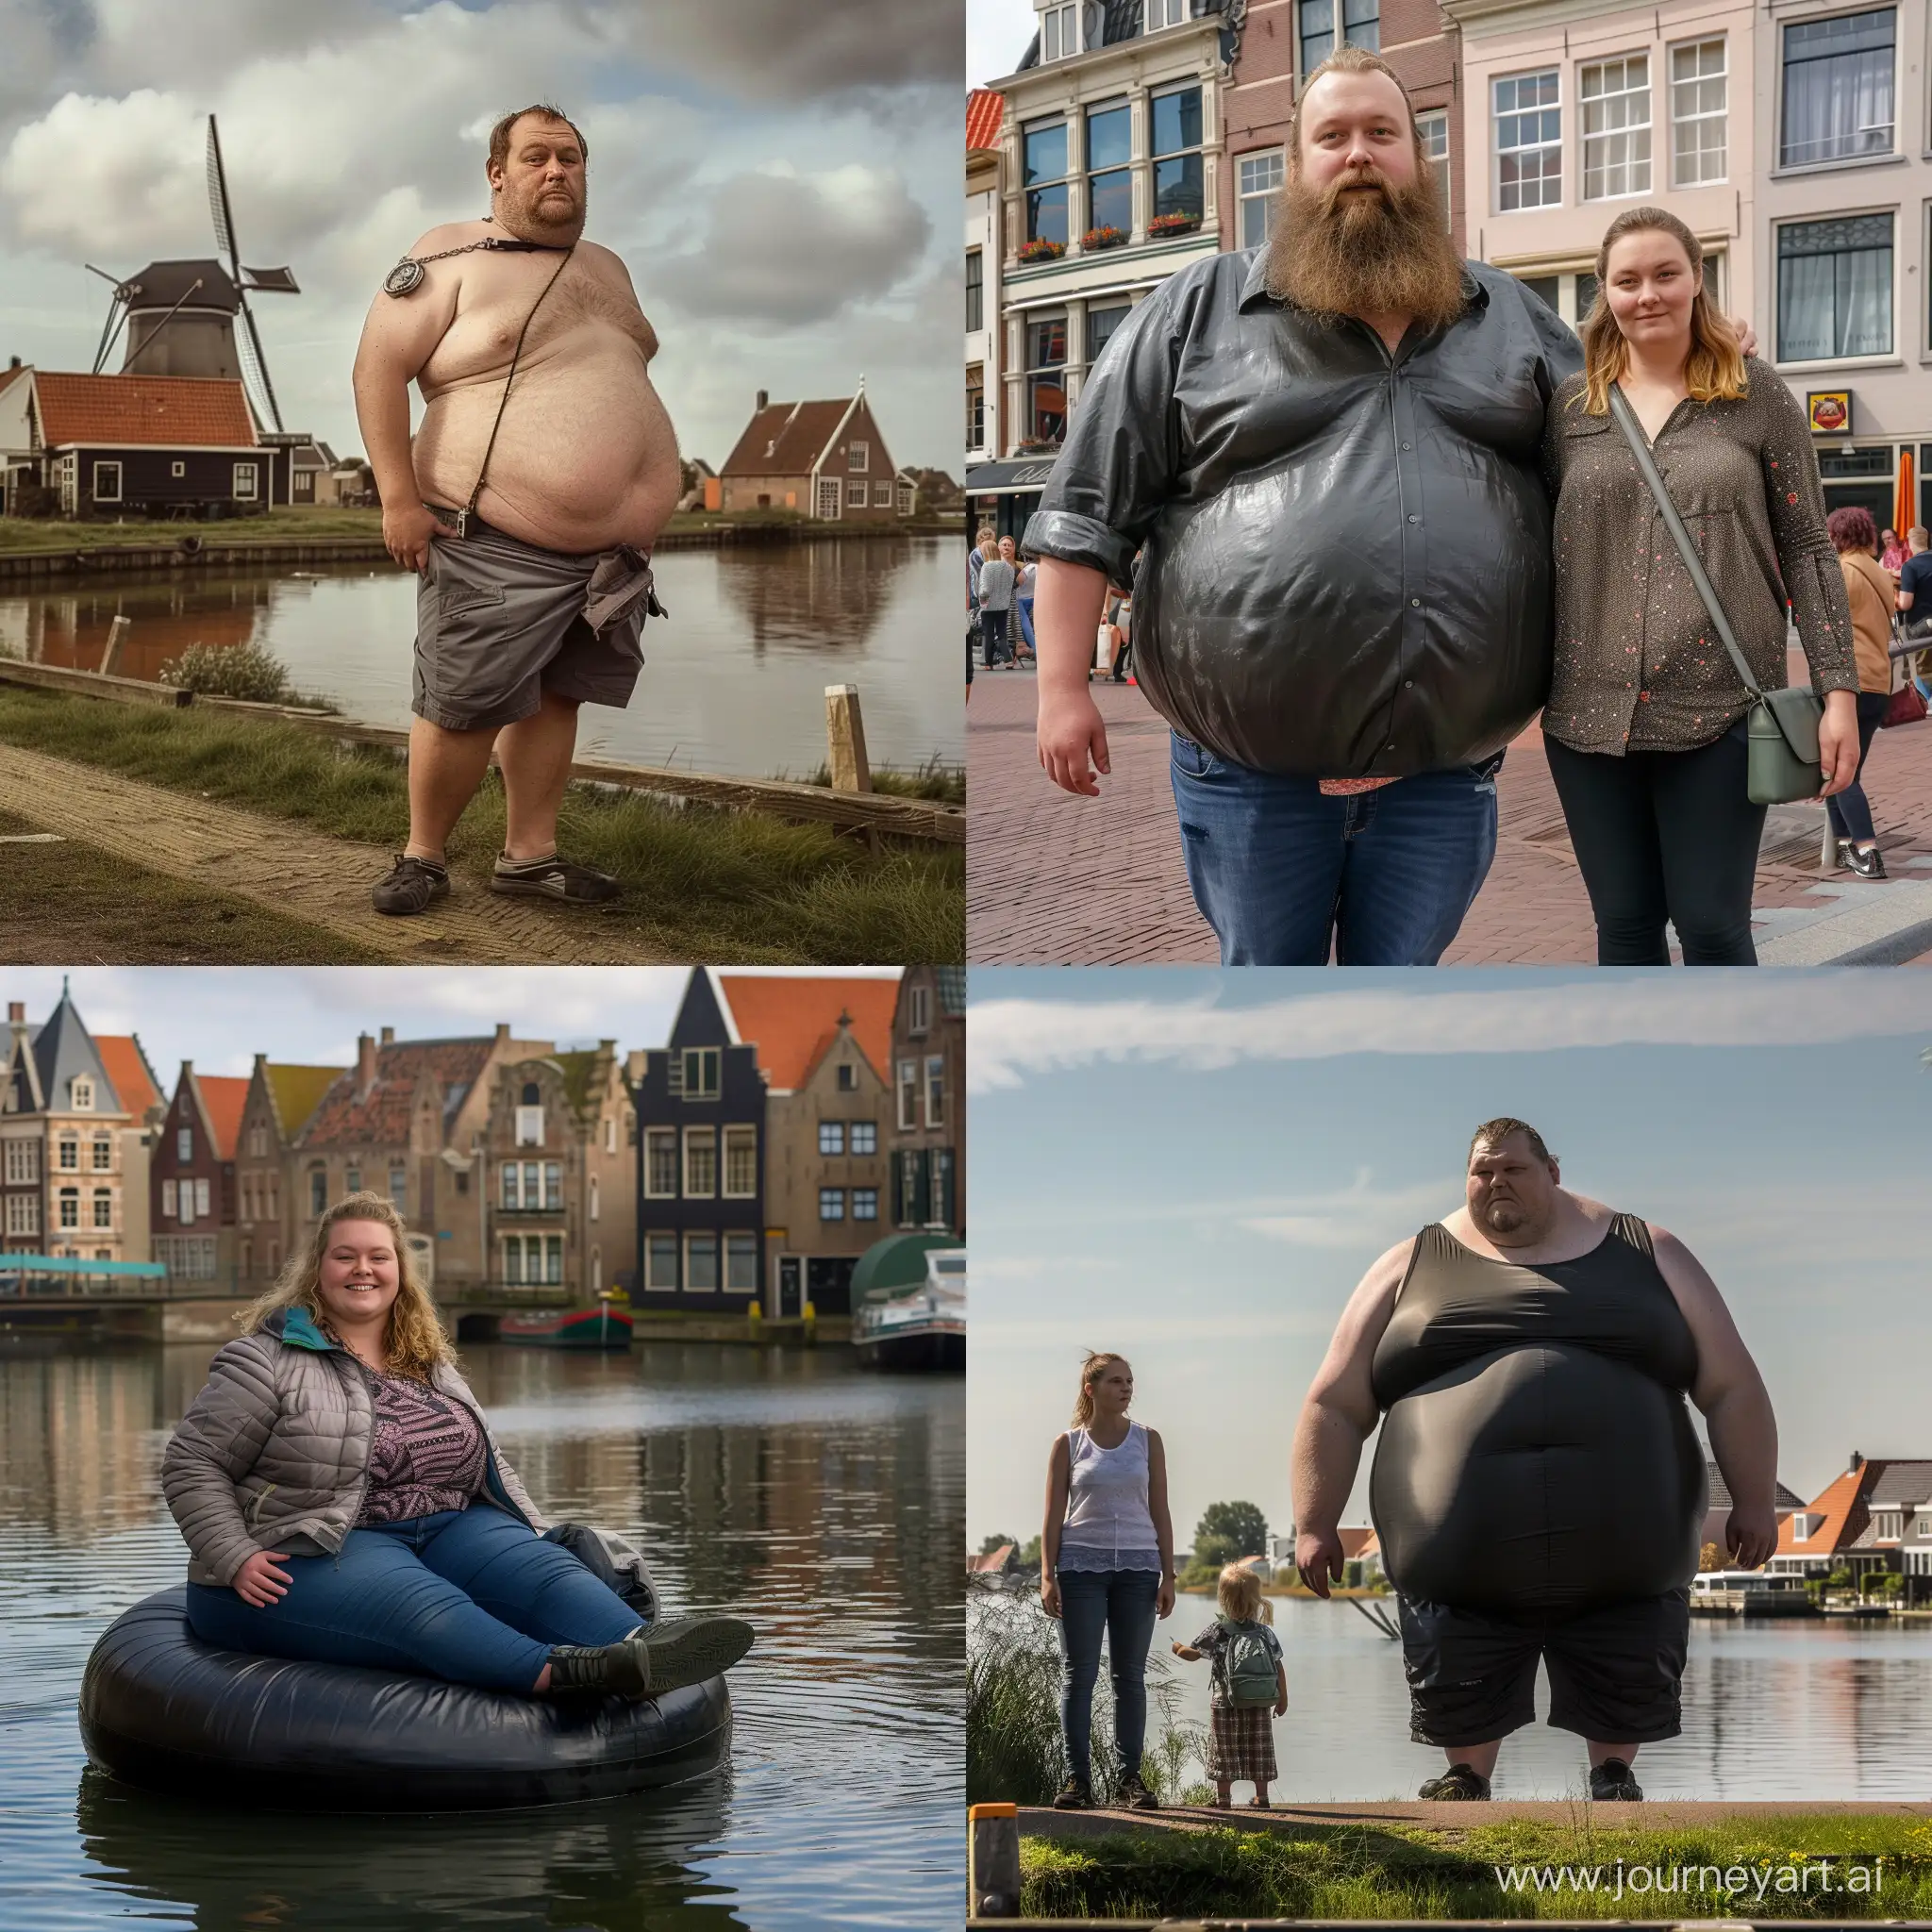 600 lb life in the netherlands